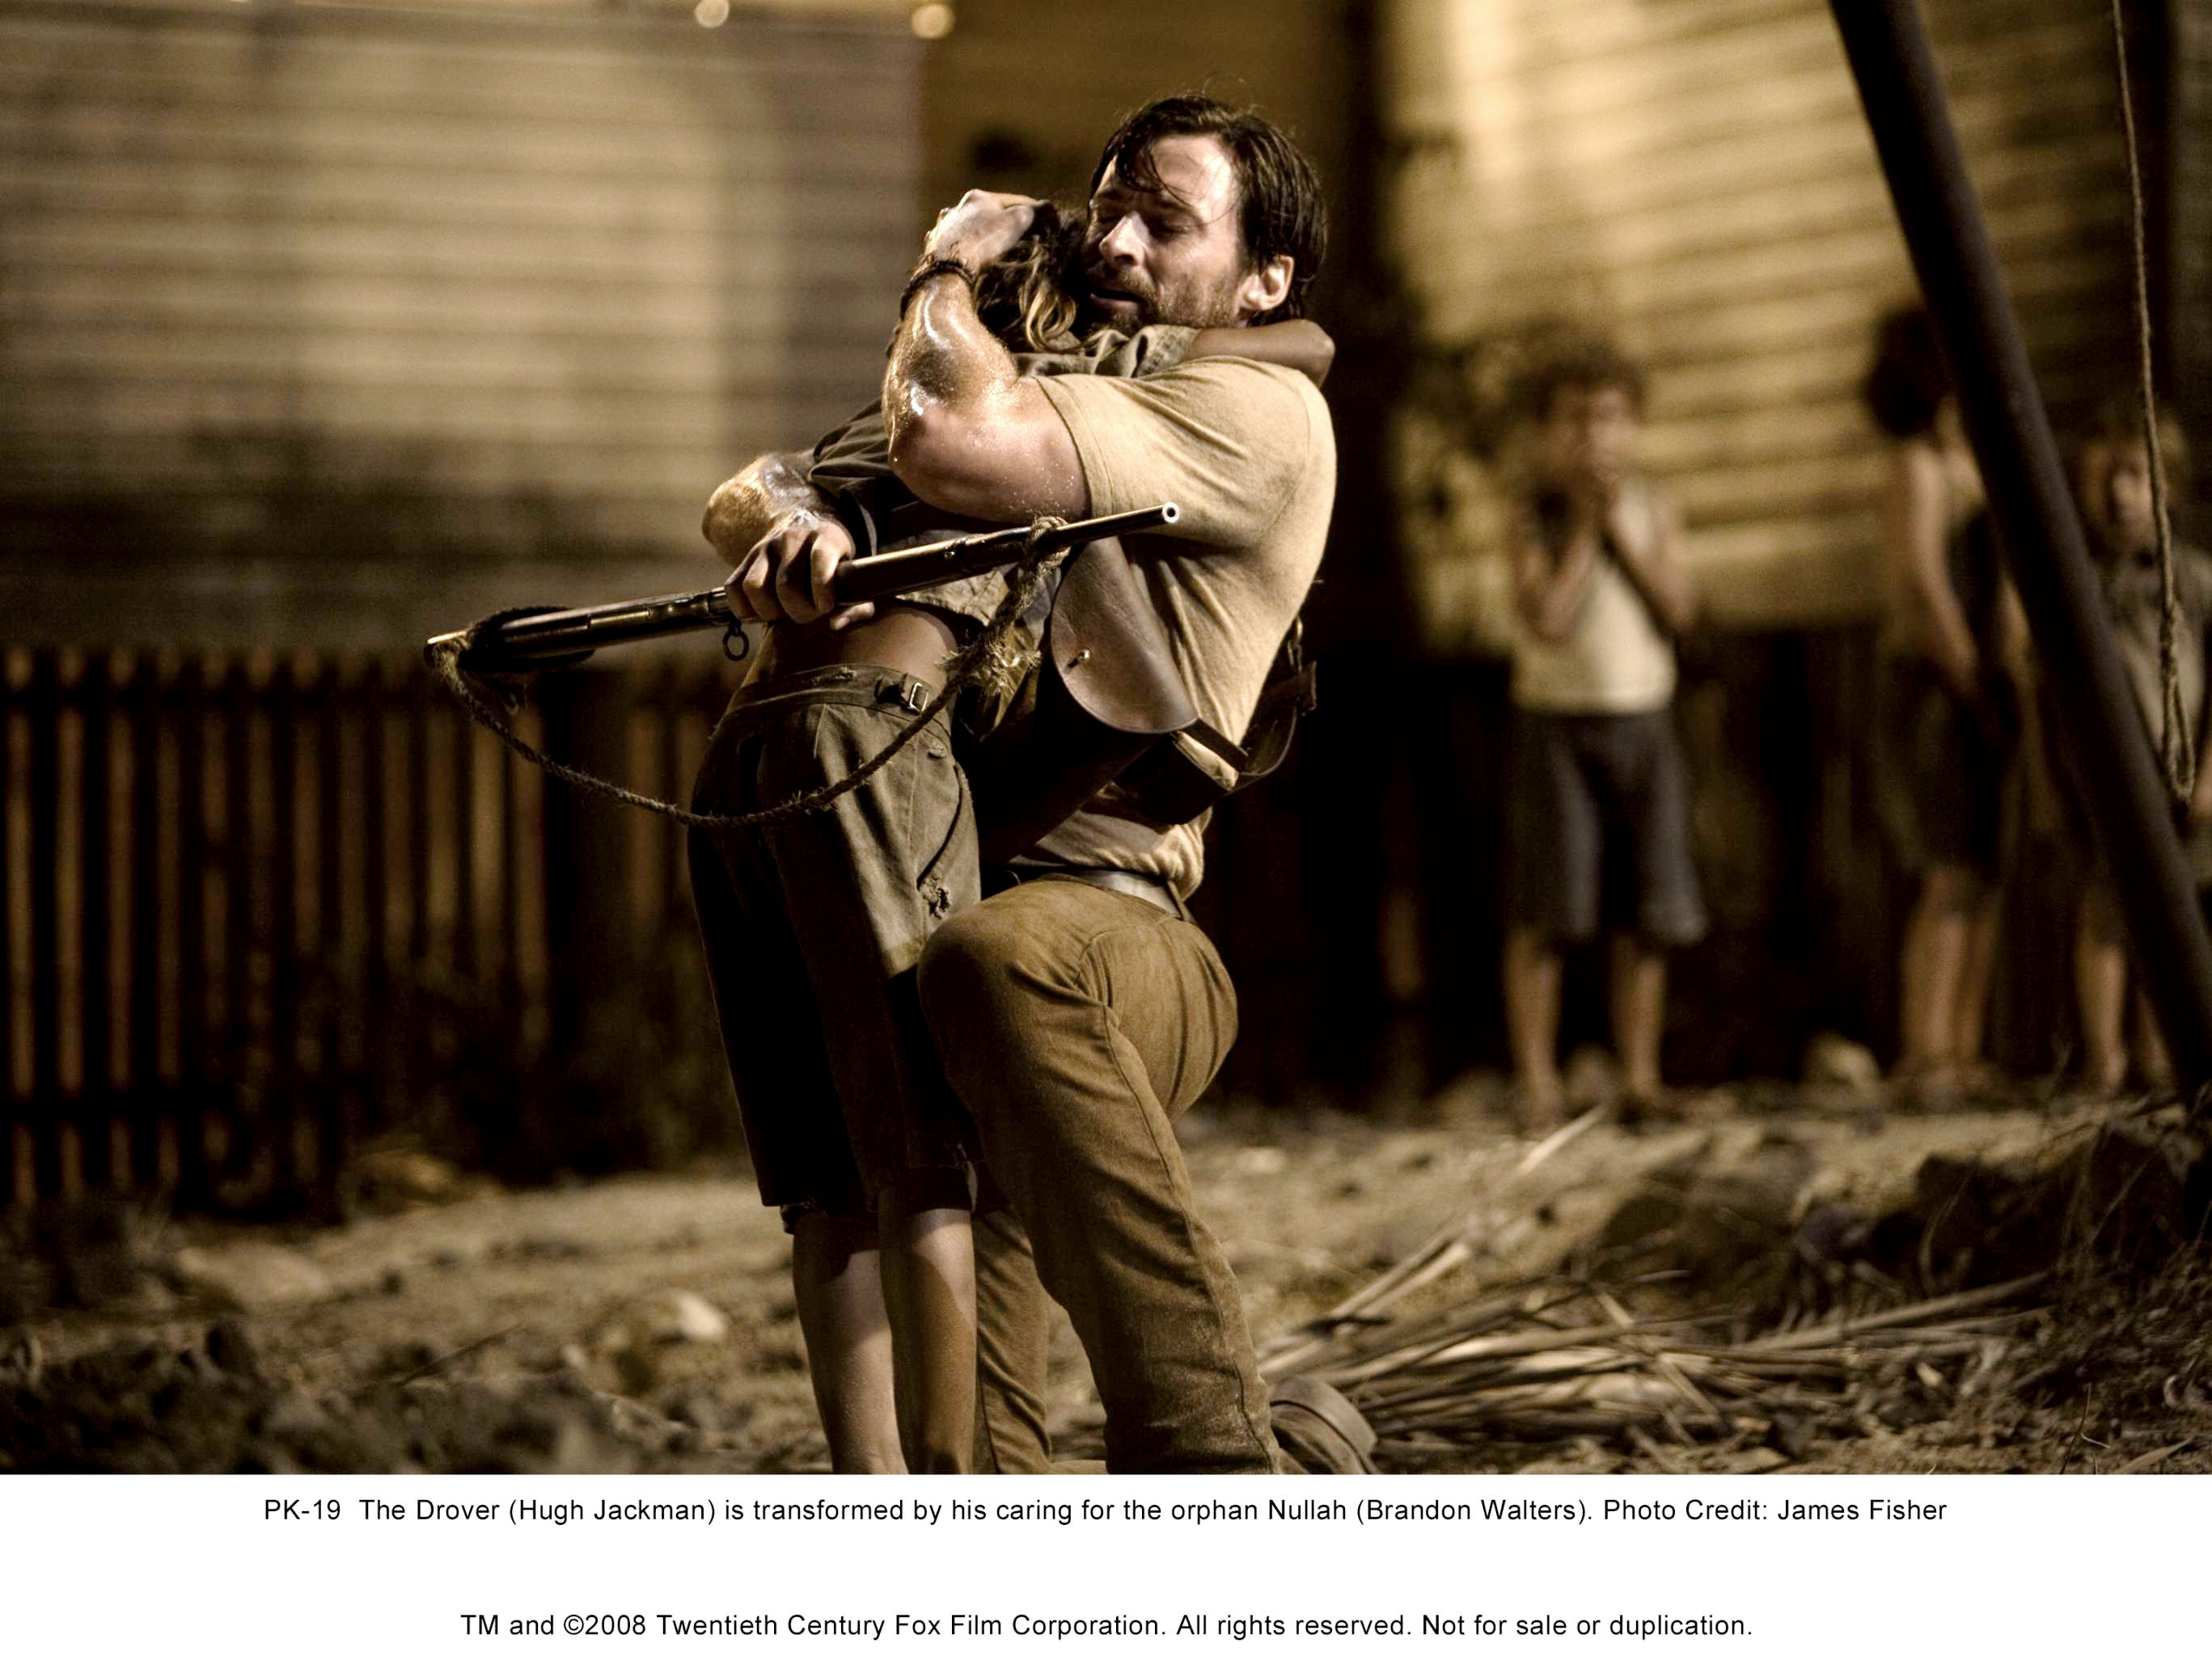 Brandon Walters stars as Nullah and Hugh Jackman stars as The Drover in The 20th Century Fox's Australia (2008). Photo credit by James Fisher.